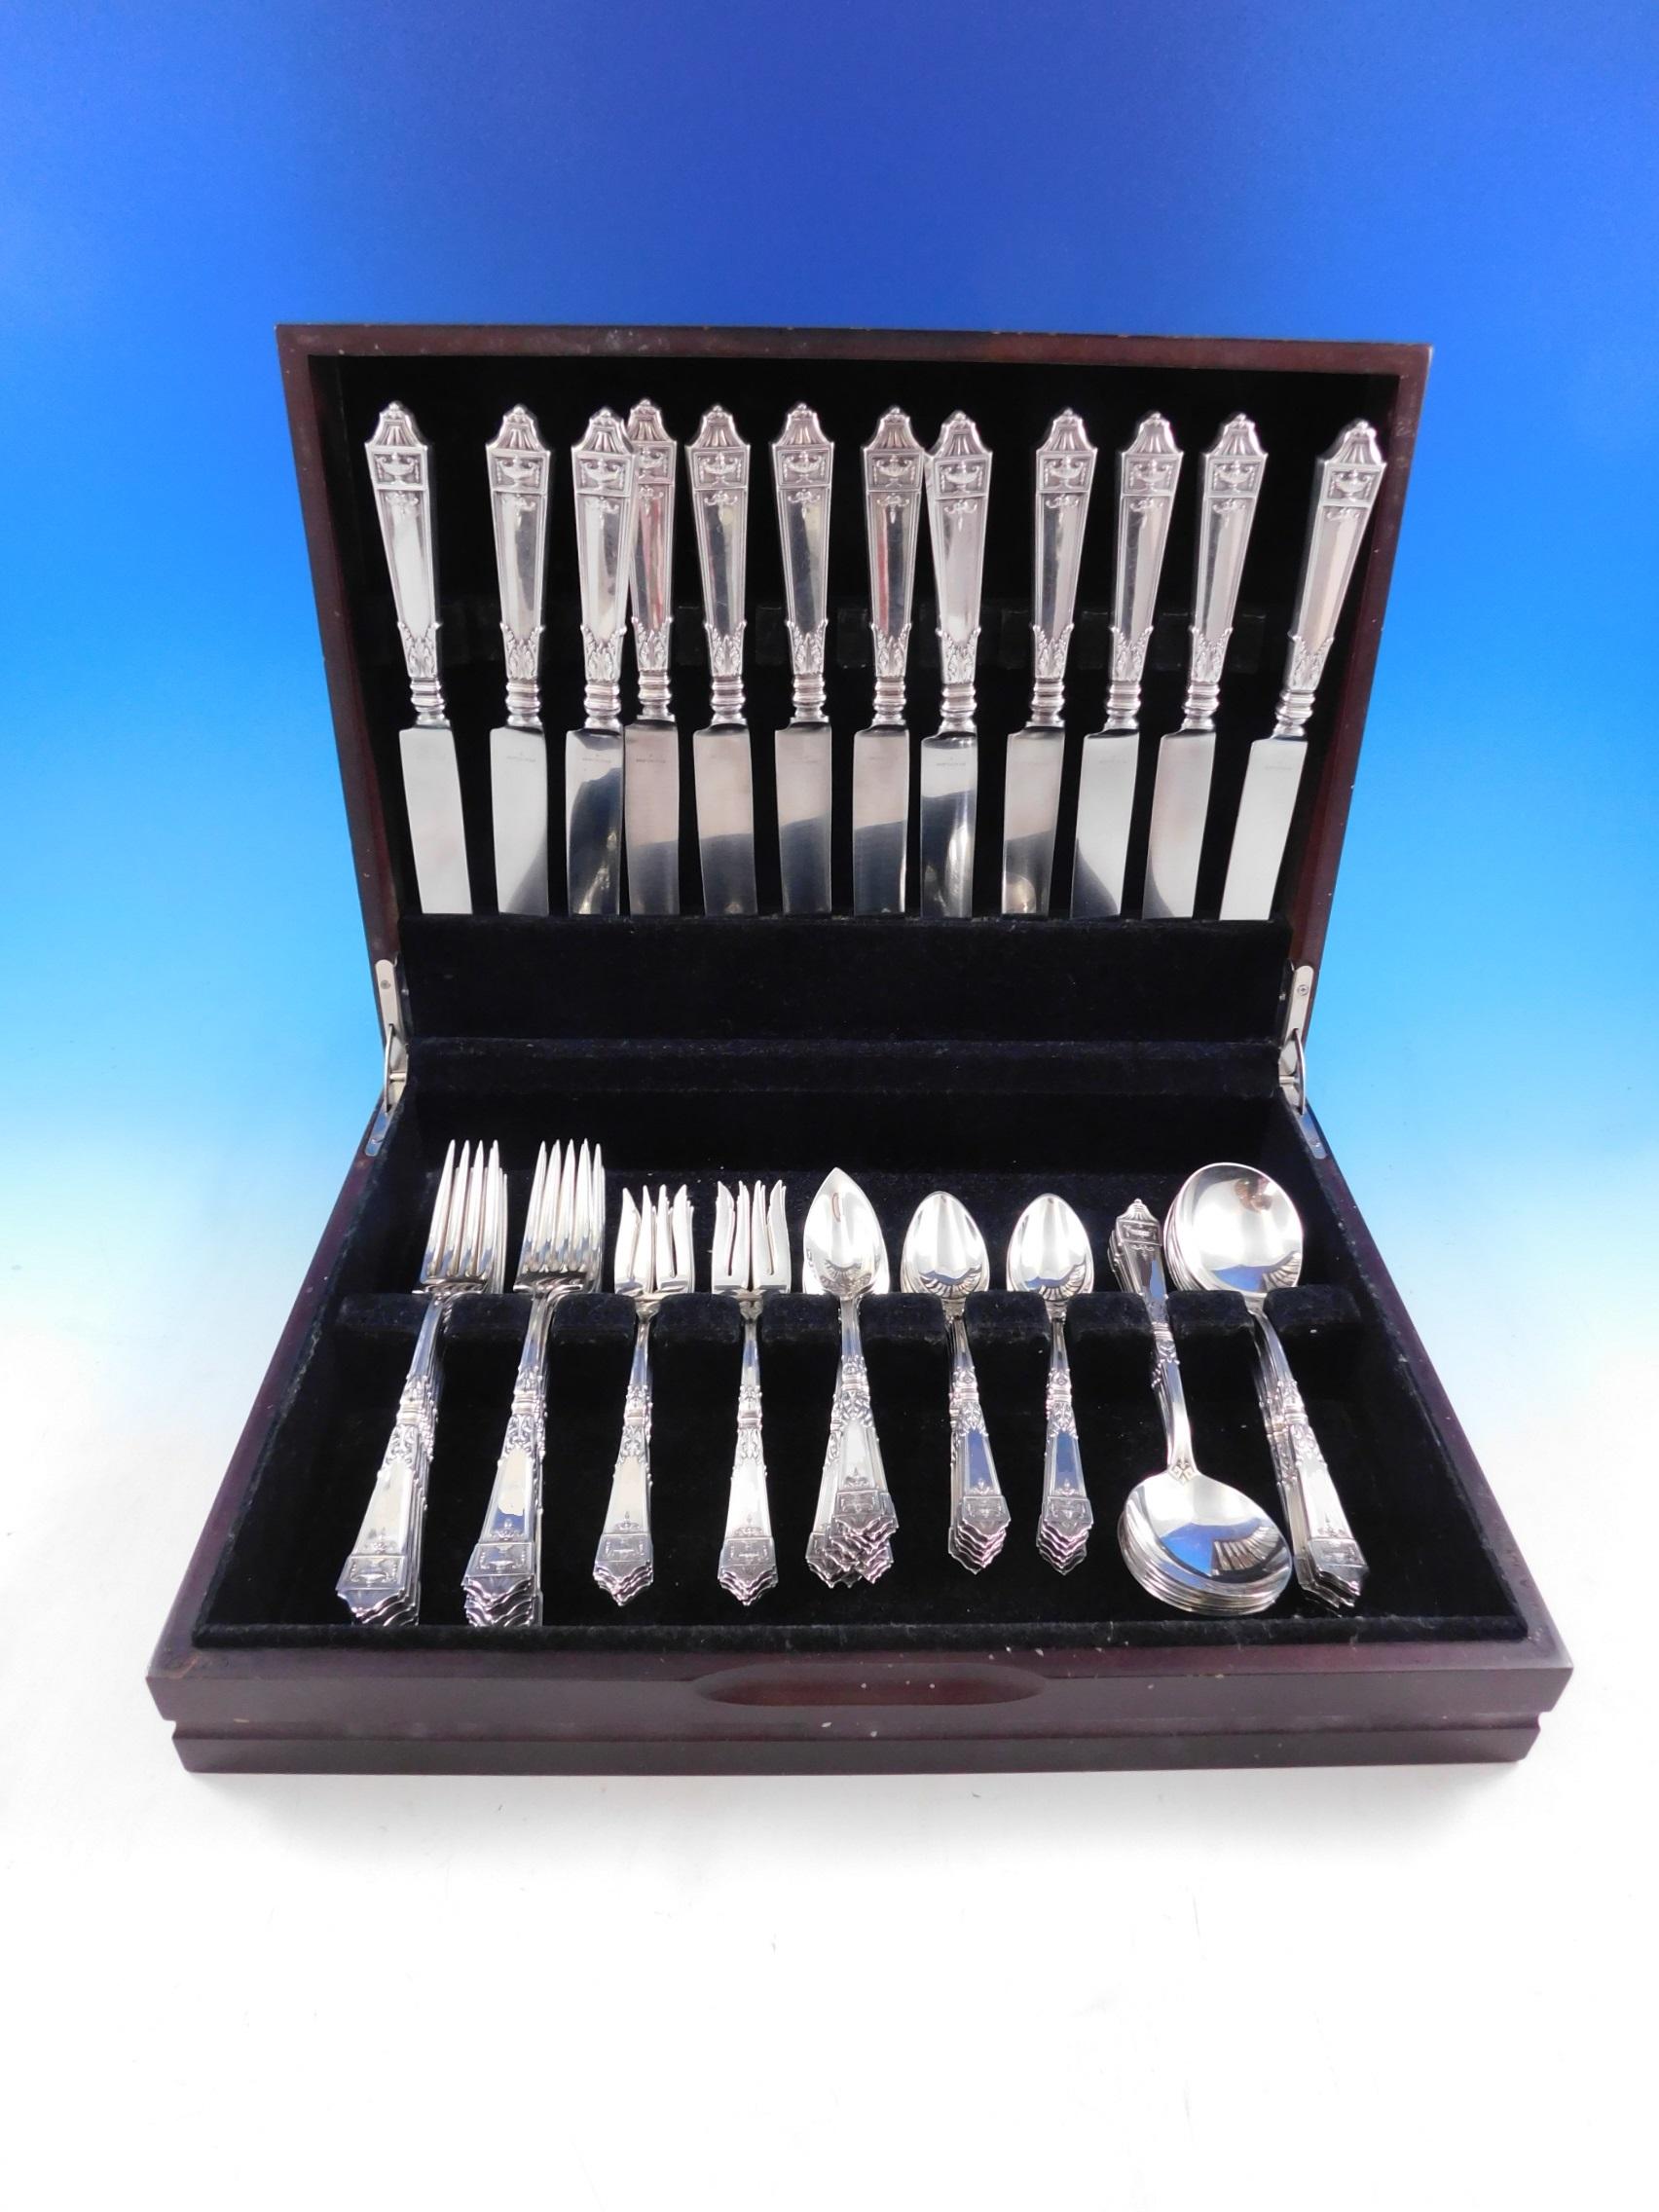 Each piece of Lansdowne is adorned with a distinctive urn design and Greek-style foliage. These design elements beautifully compliment Colonial and Georgian decor.
Dinner Size Lansdowne by Gorham sterling silver Flatware set - 72 pieces. This set